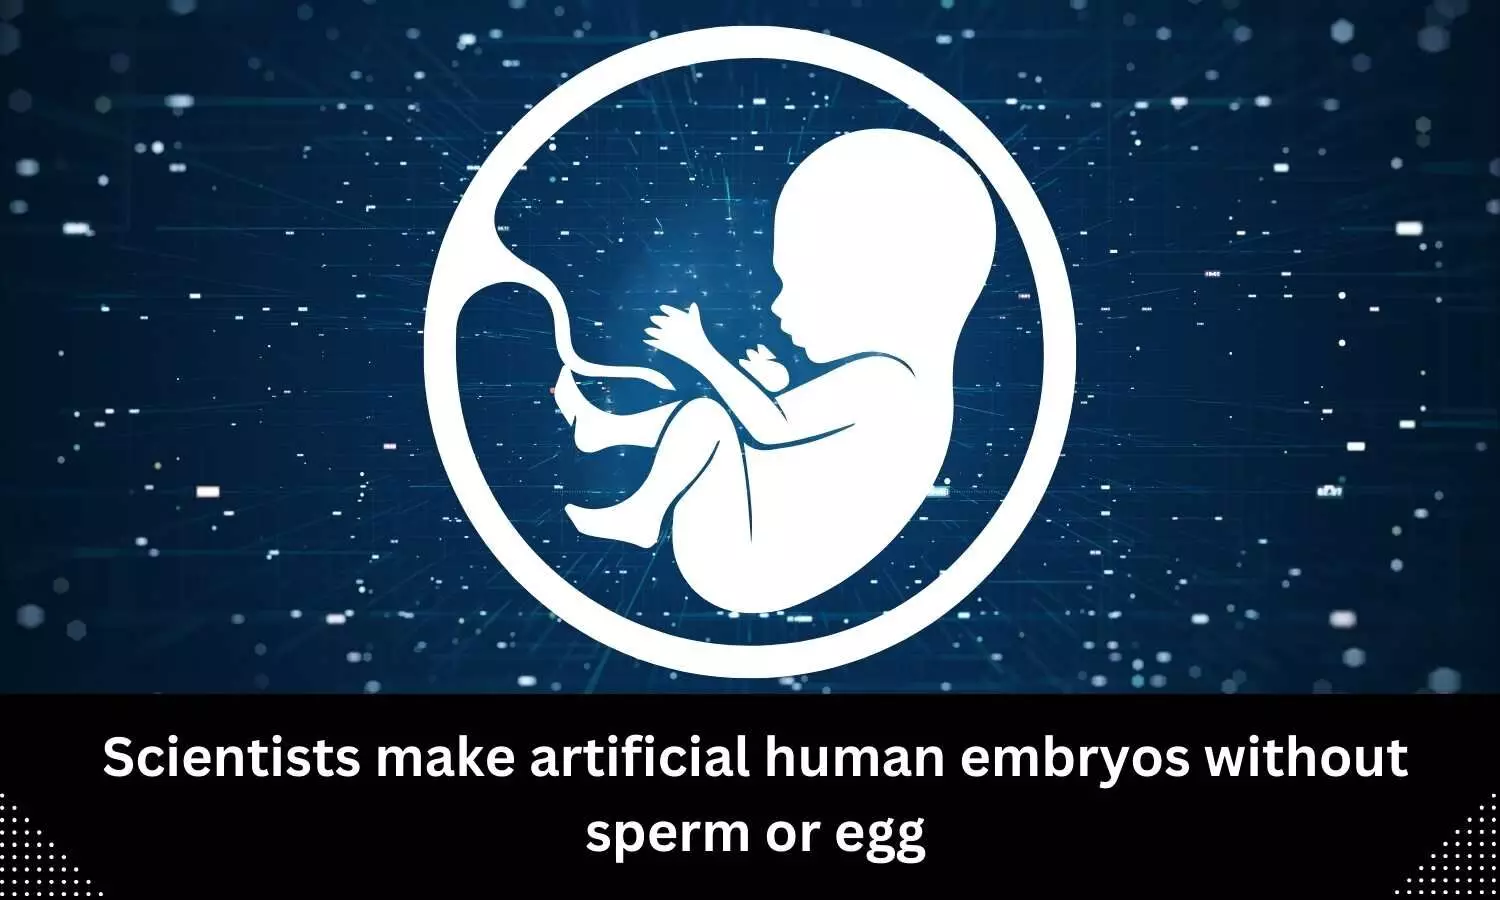 Scientists make artificial human embryos without sperm or egg